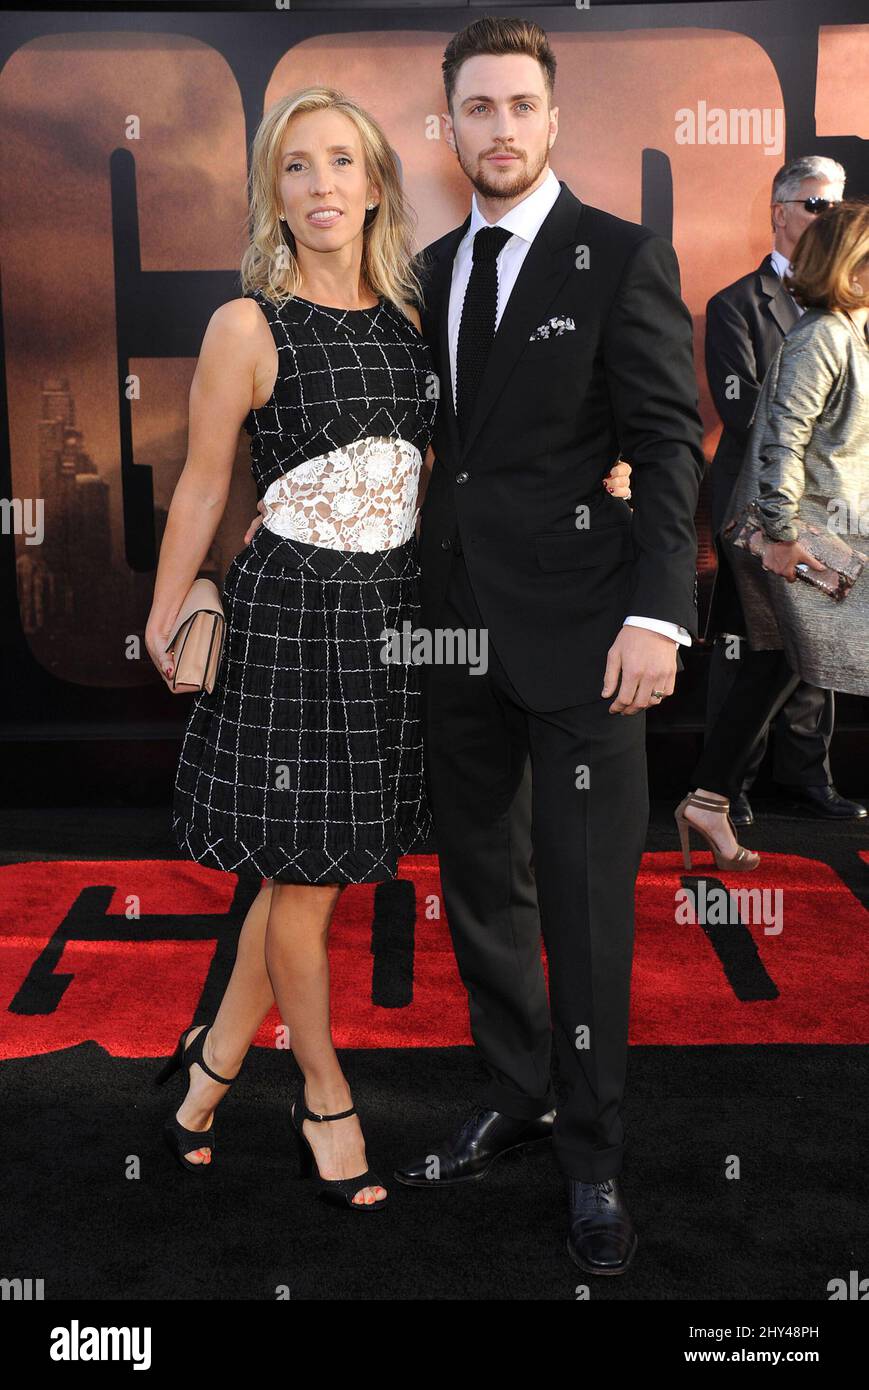 Aaron Taylor-Johnson & Sam Taylor-Wood attending the premiere of Godzilla in Los Angeles, California. Stock Photo